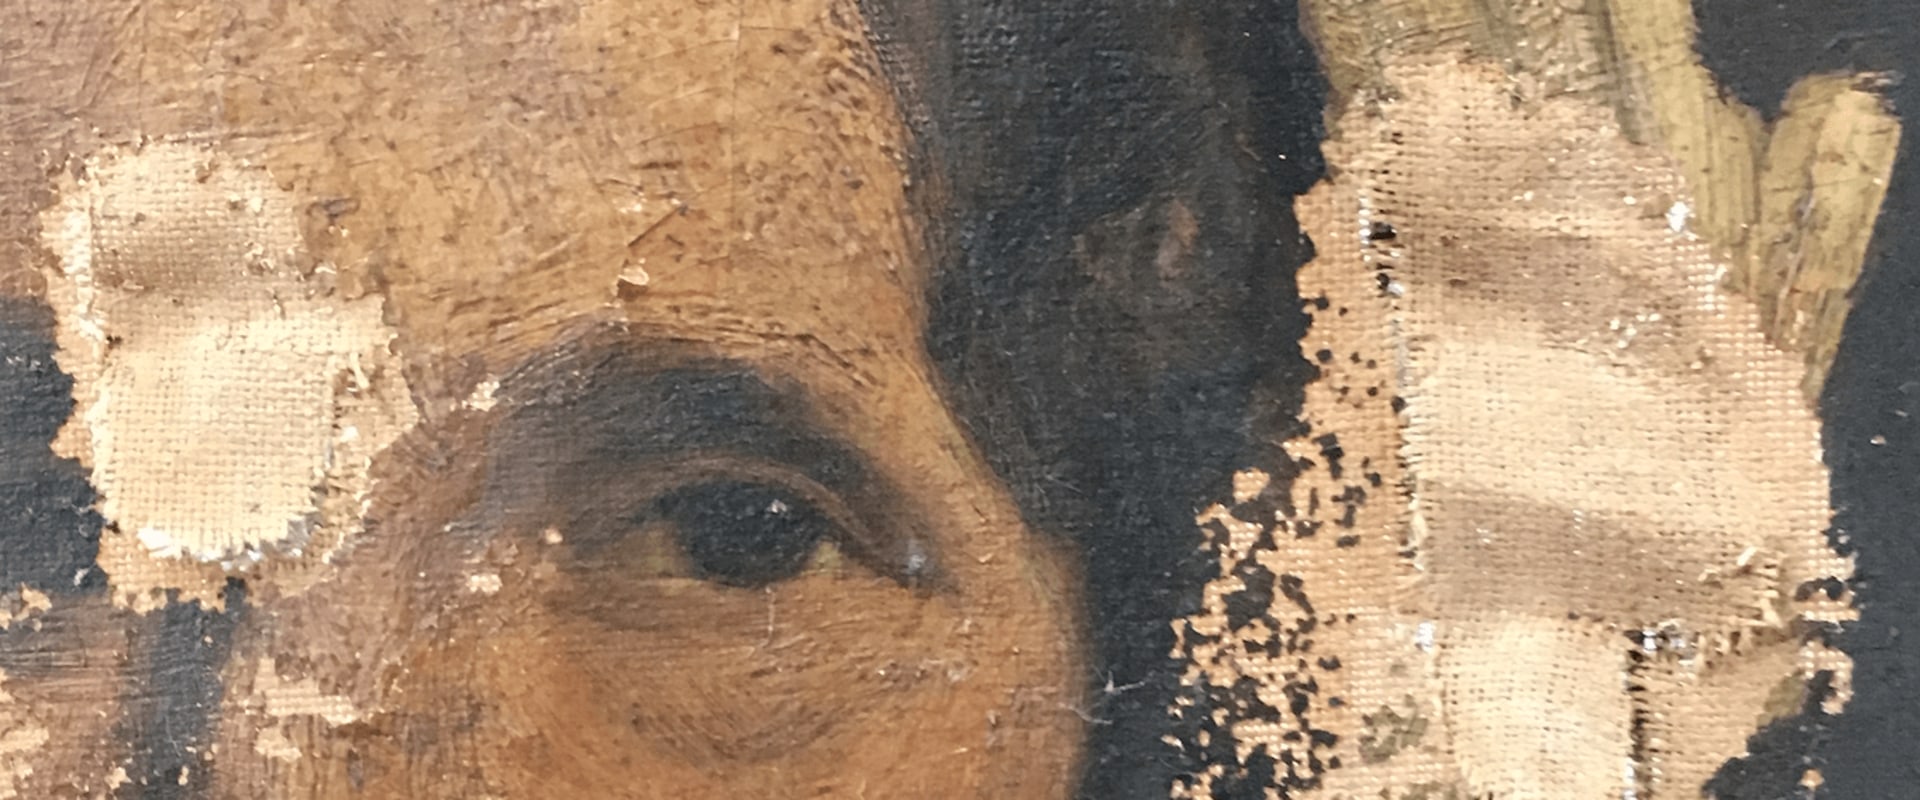 Can water damaged paintings be restored?